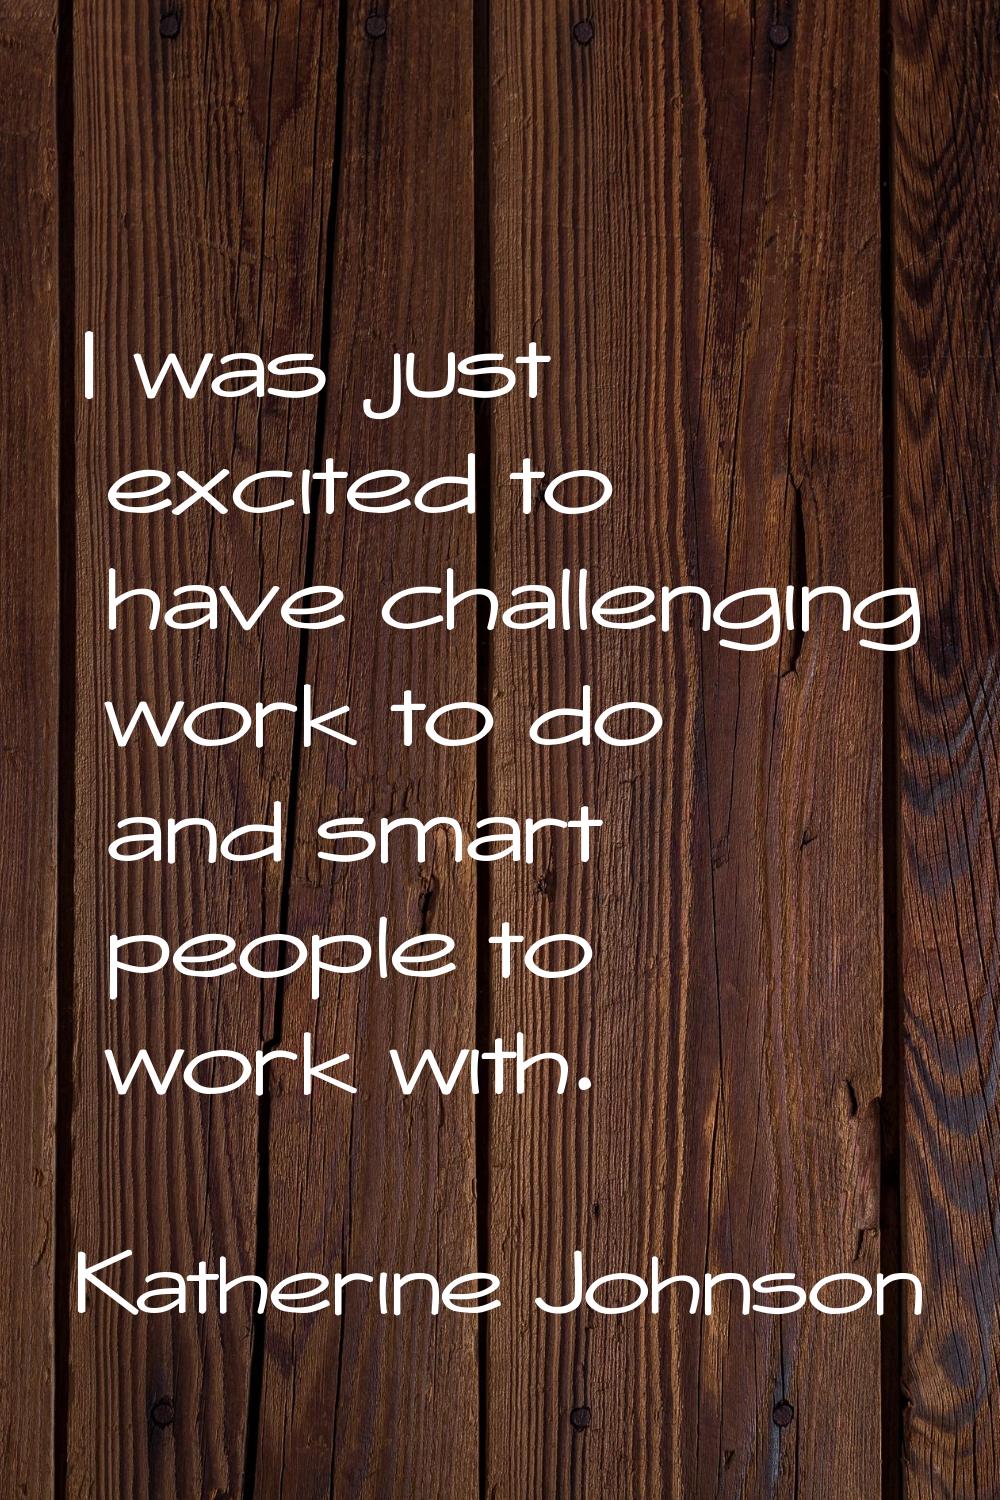 I was just excited to have challenging work to do and smart people to work with.